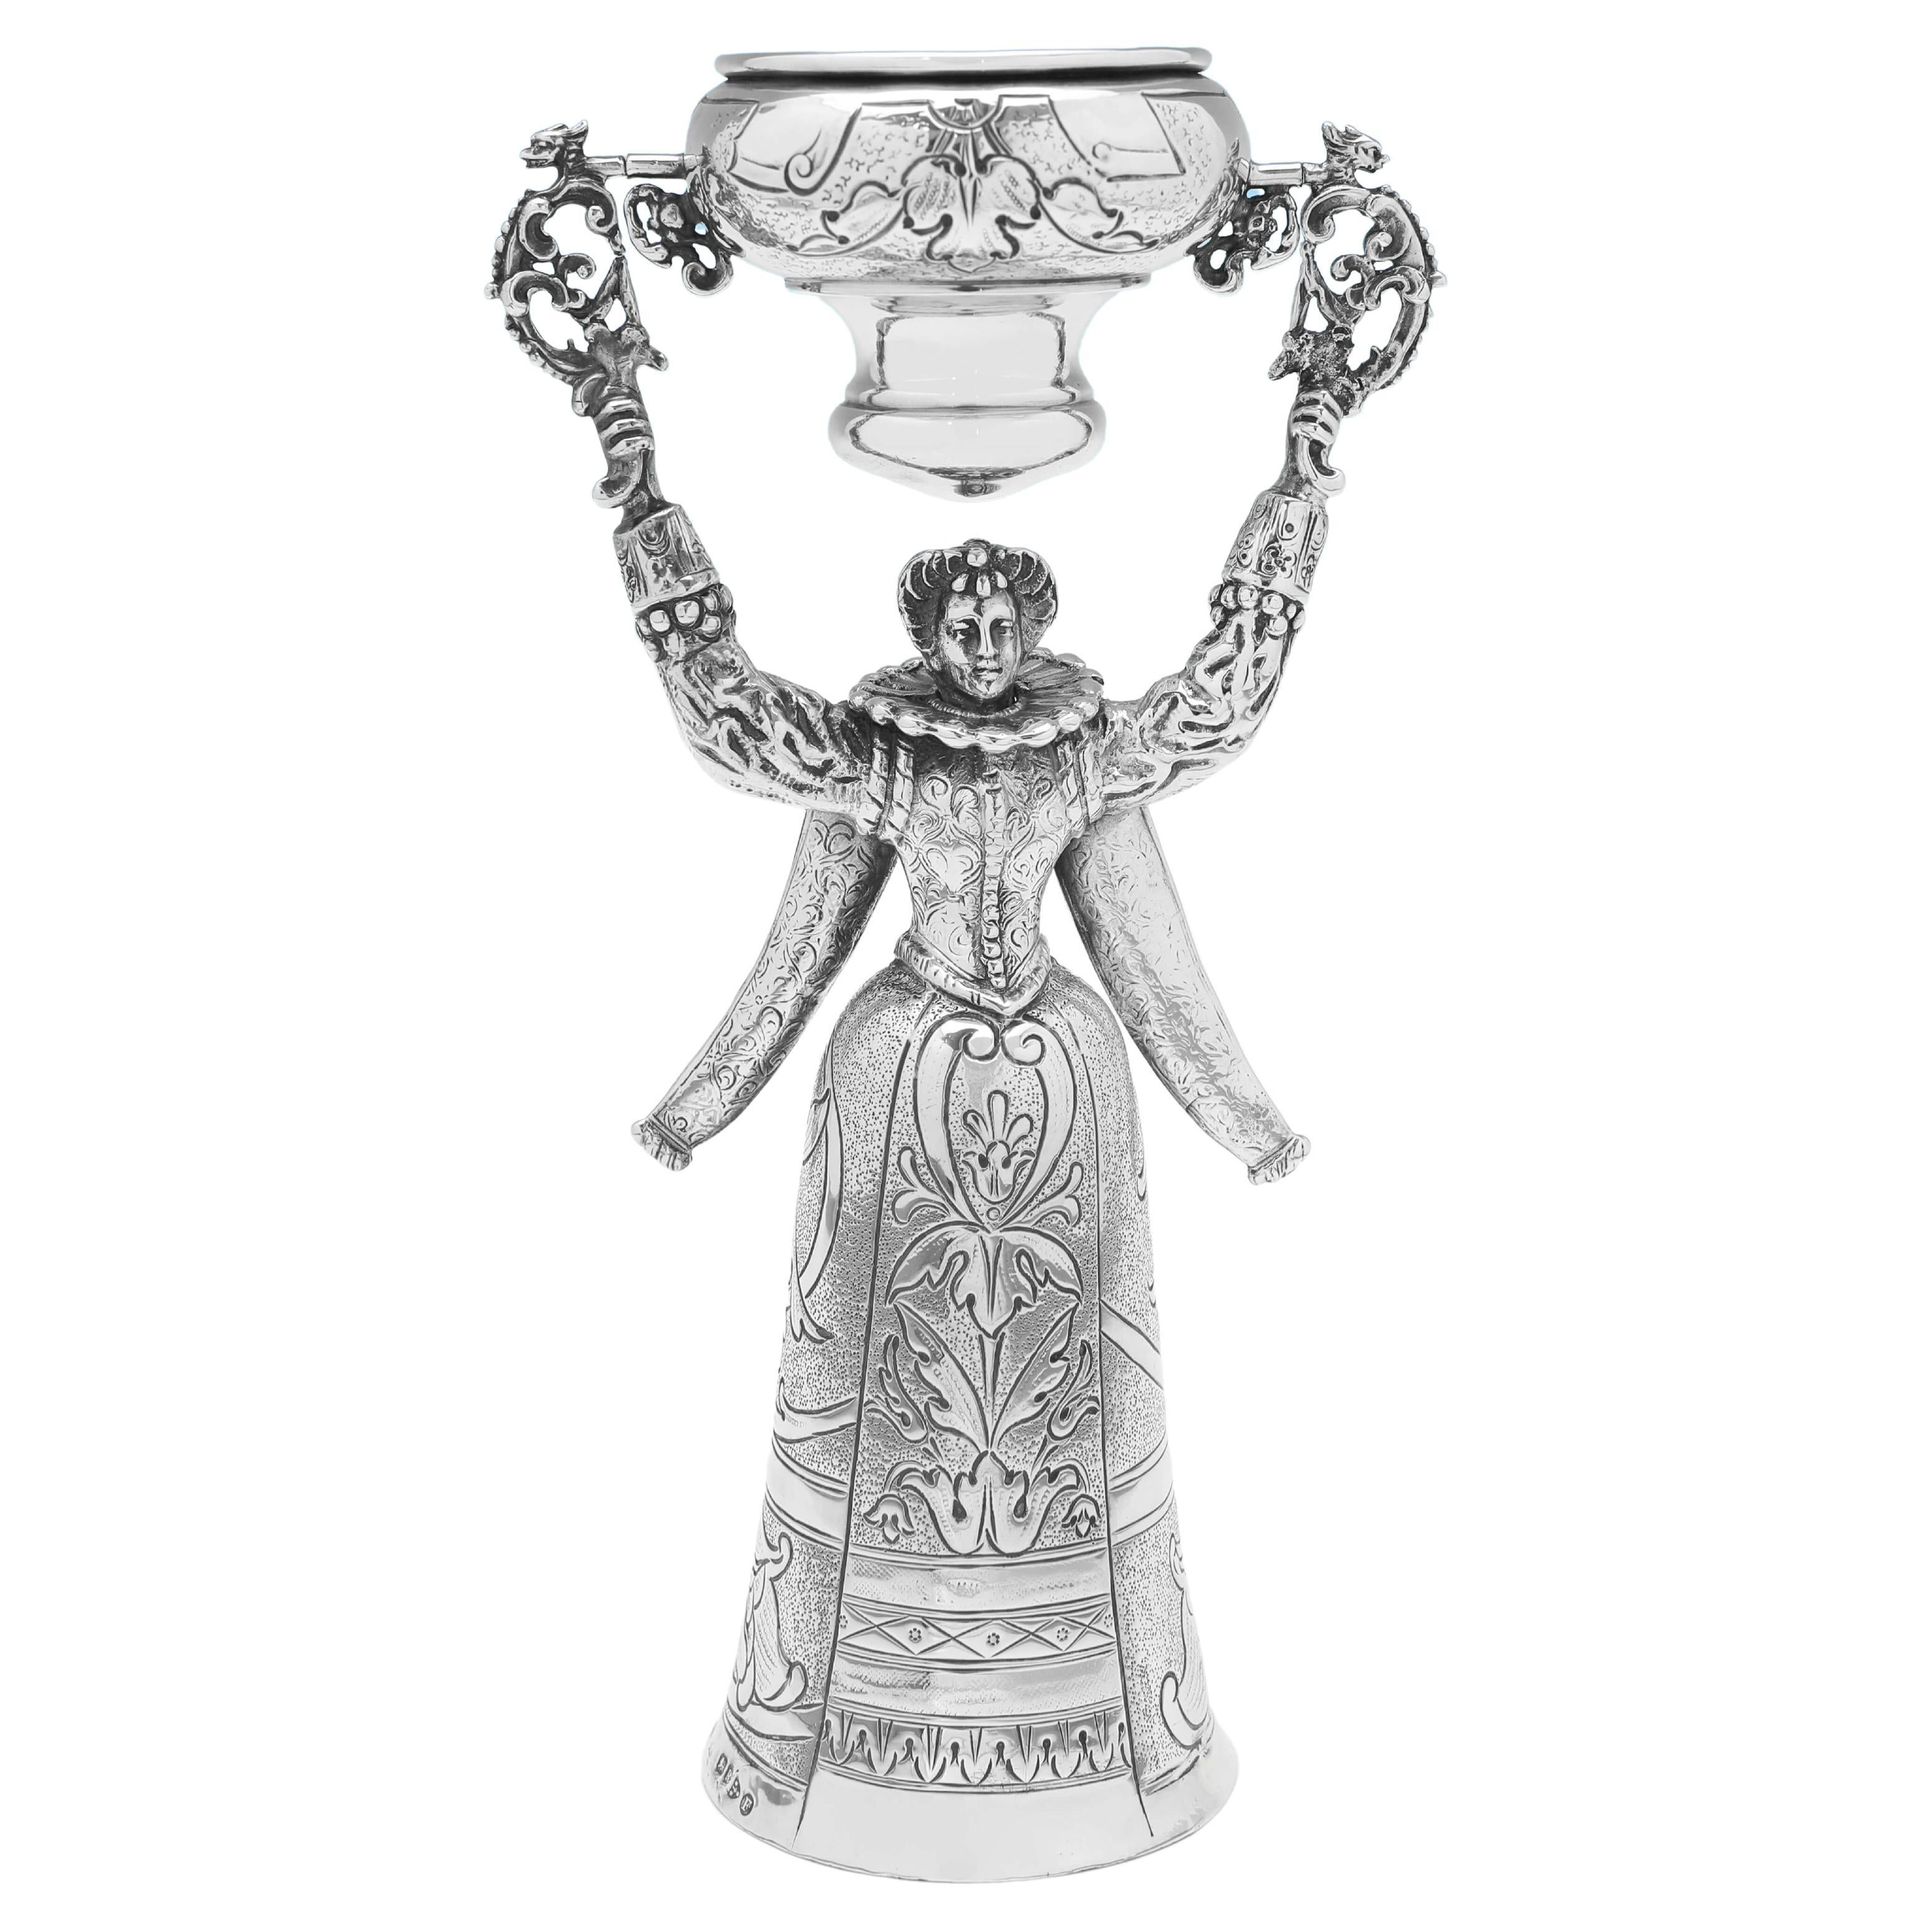 viktorianischer Sterlingsilber Wager Cup / Marriage Cup Chester 1900 Berthold Muller im Angebot